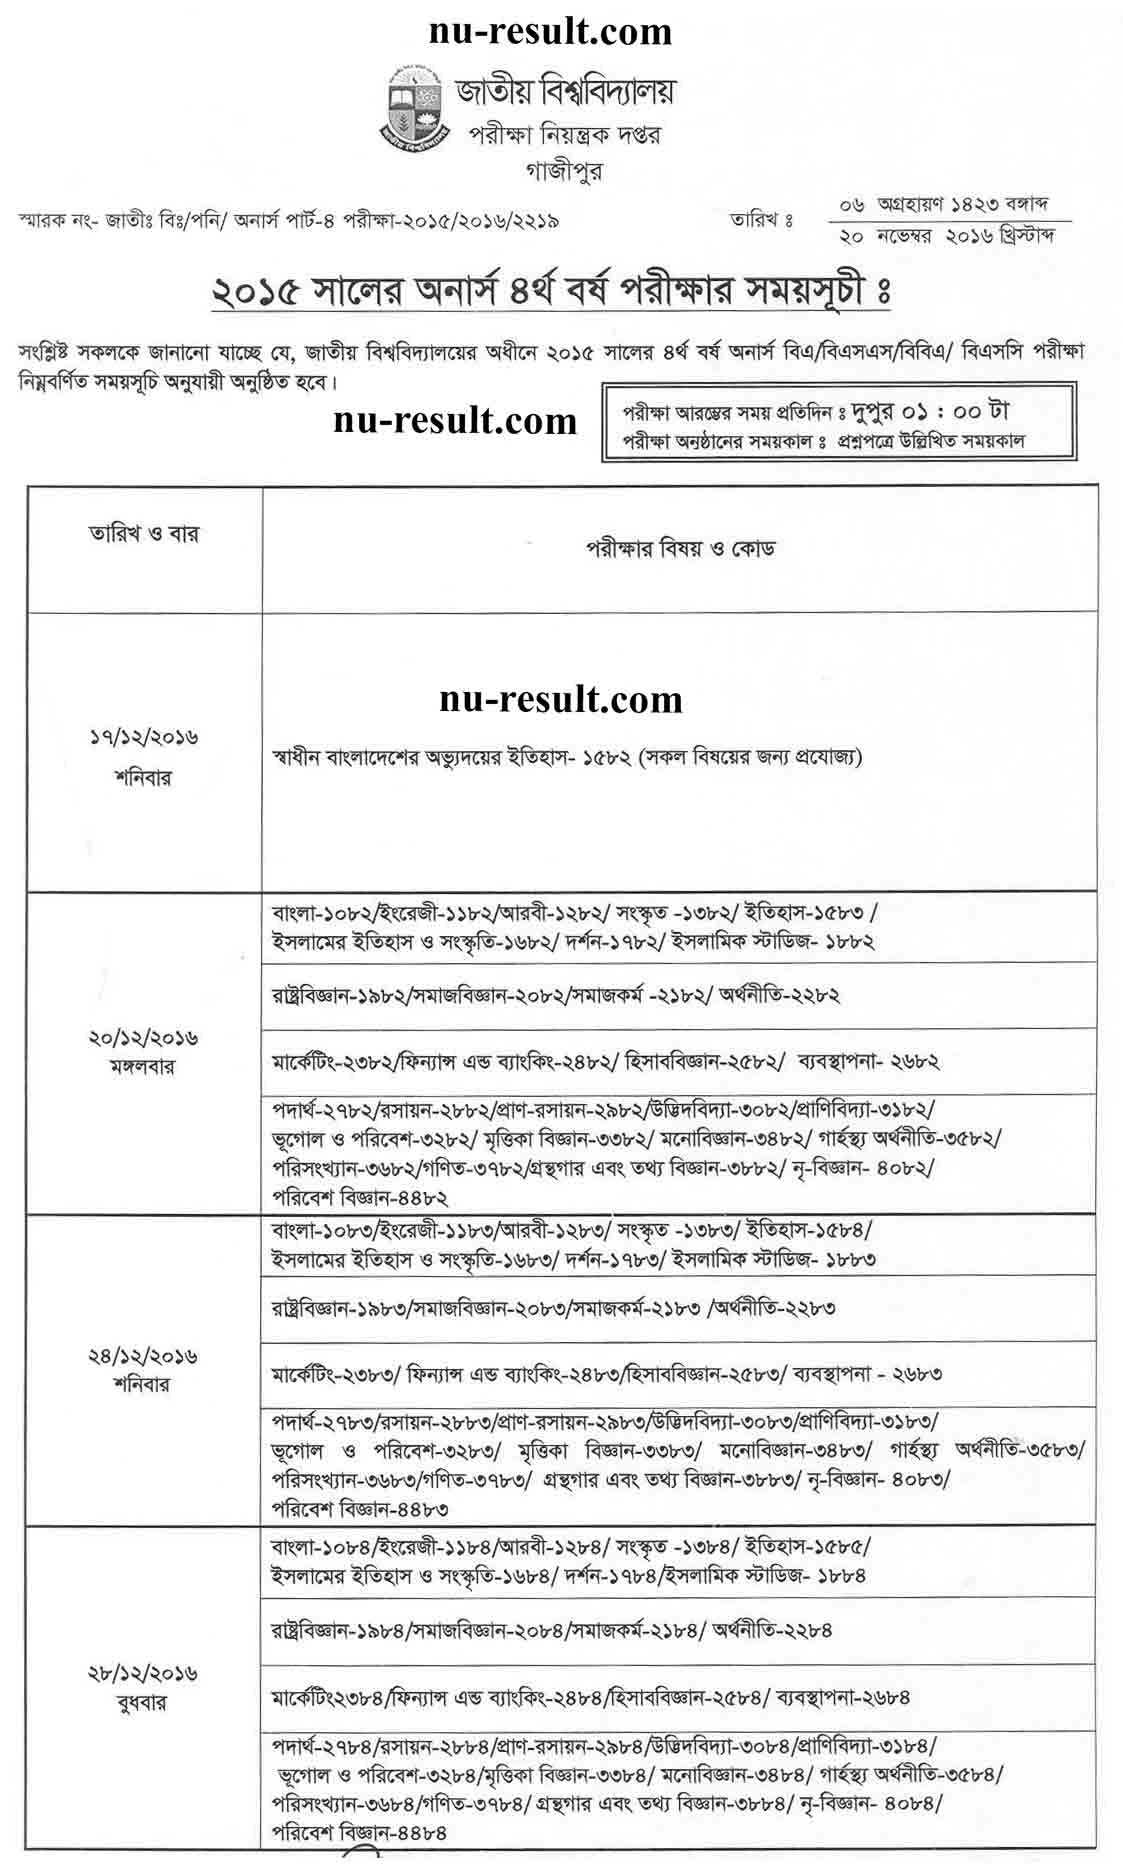 National University Honors 4th year exam routine 2015 nu.edu.bd/routines